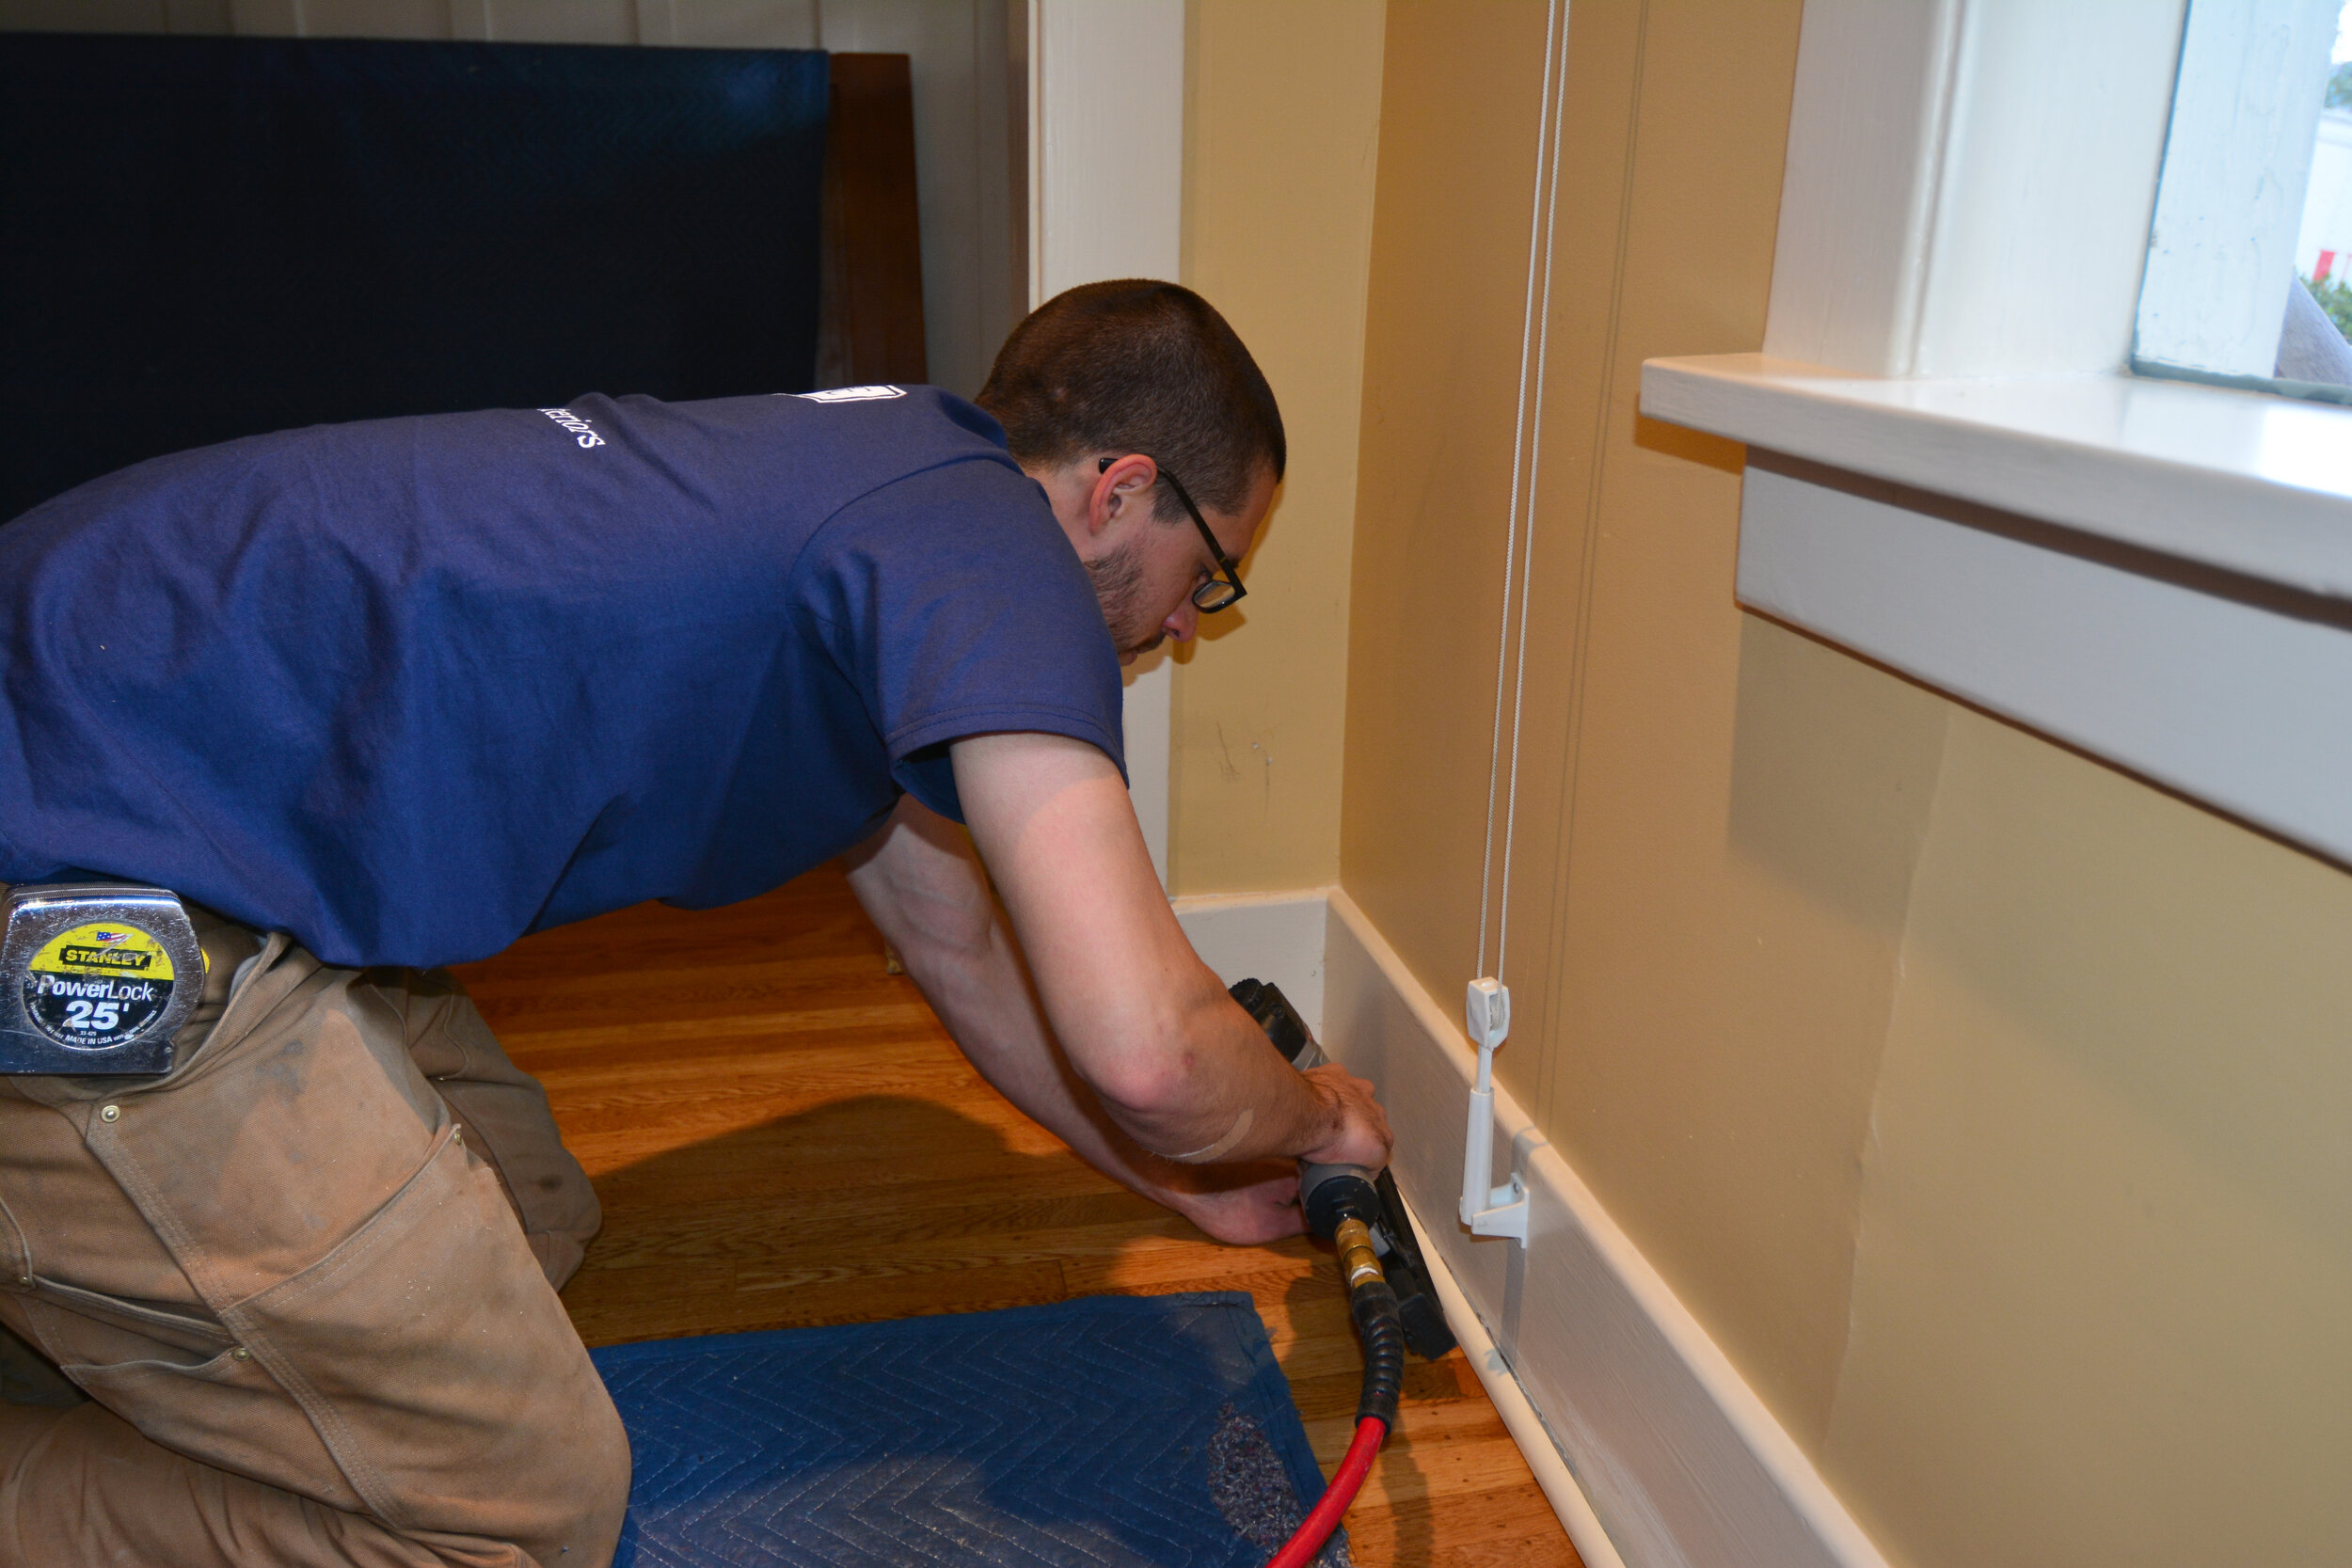 Troubleshooting tips for common handyman problems